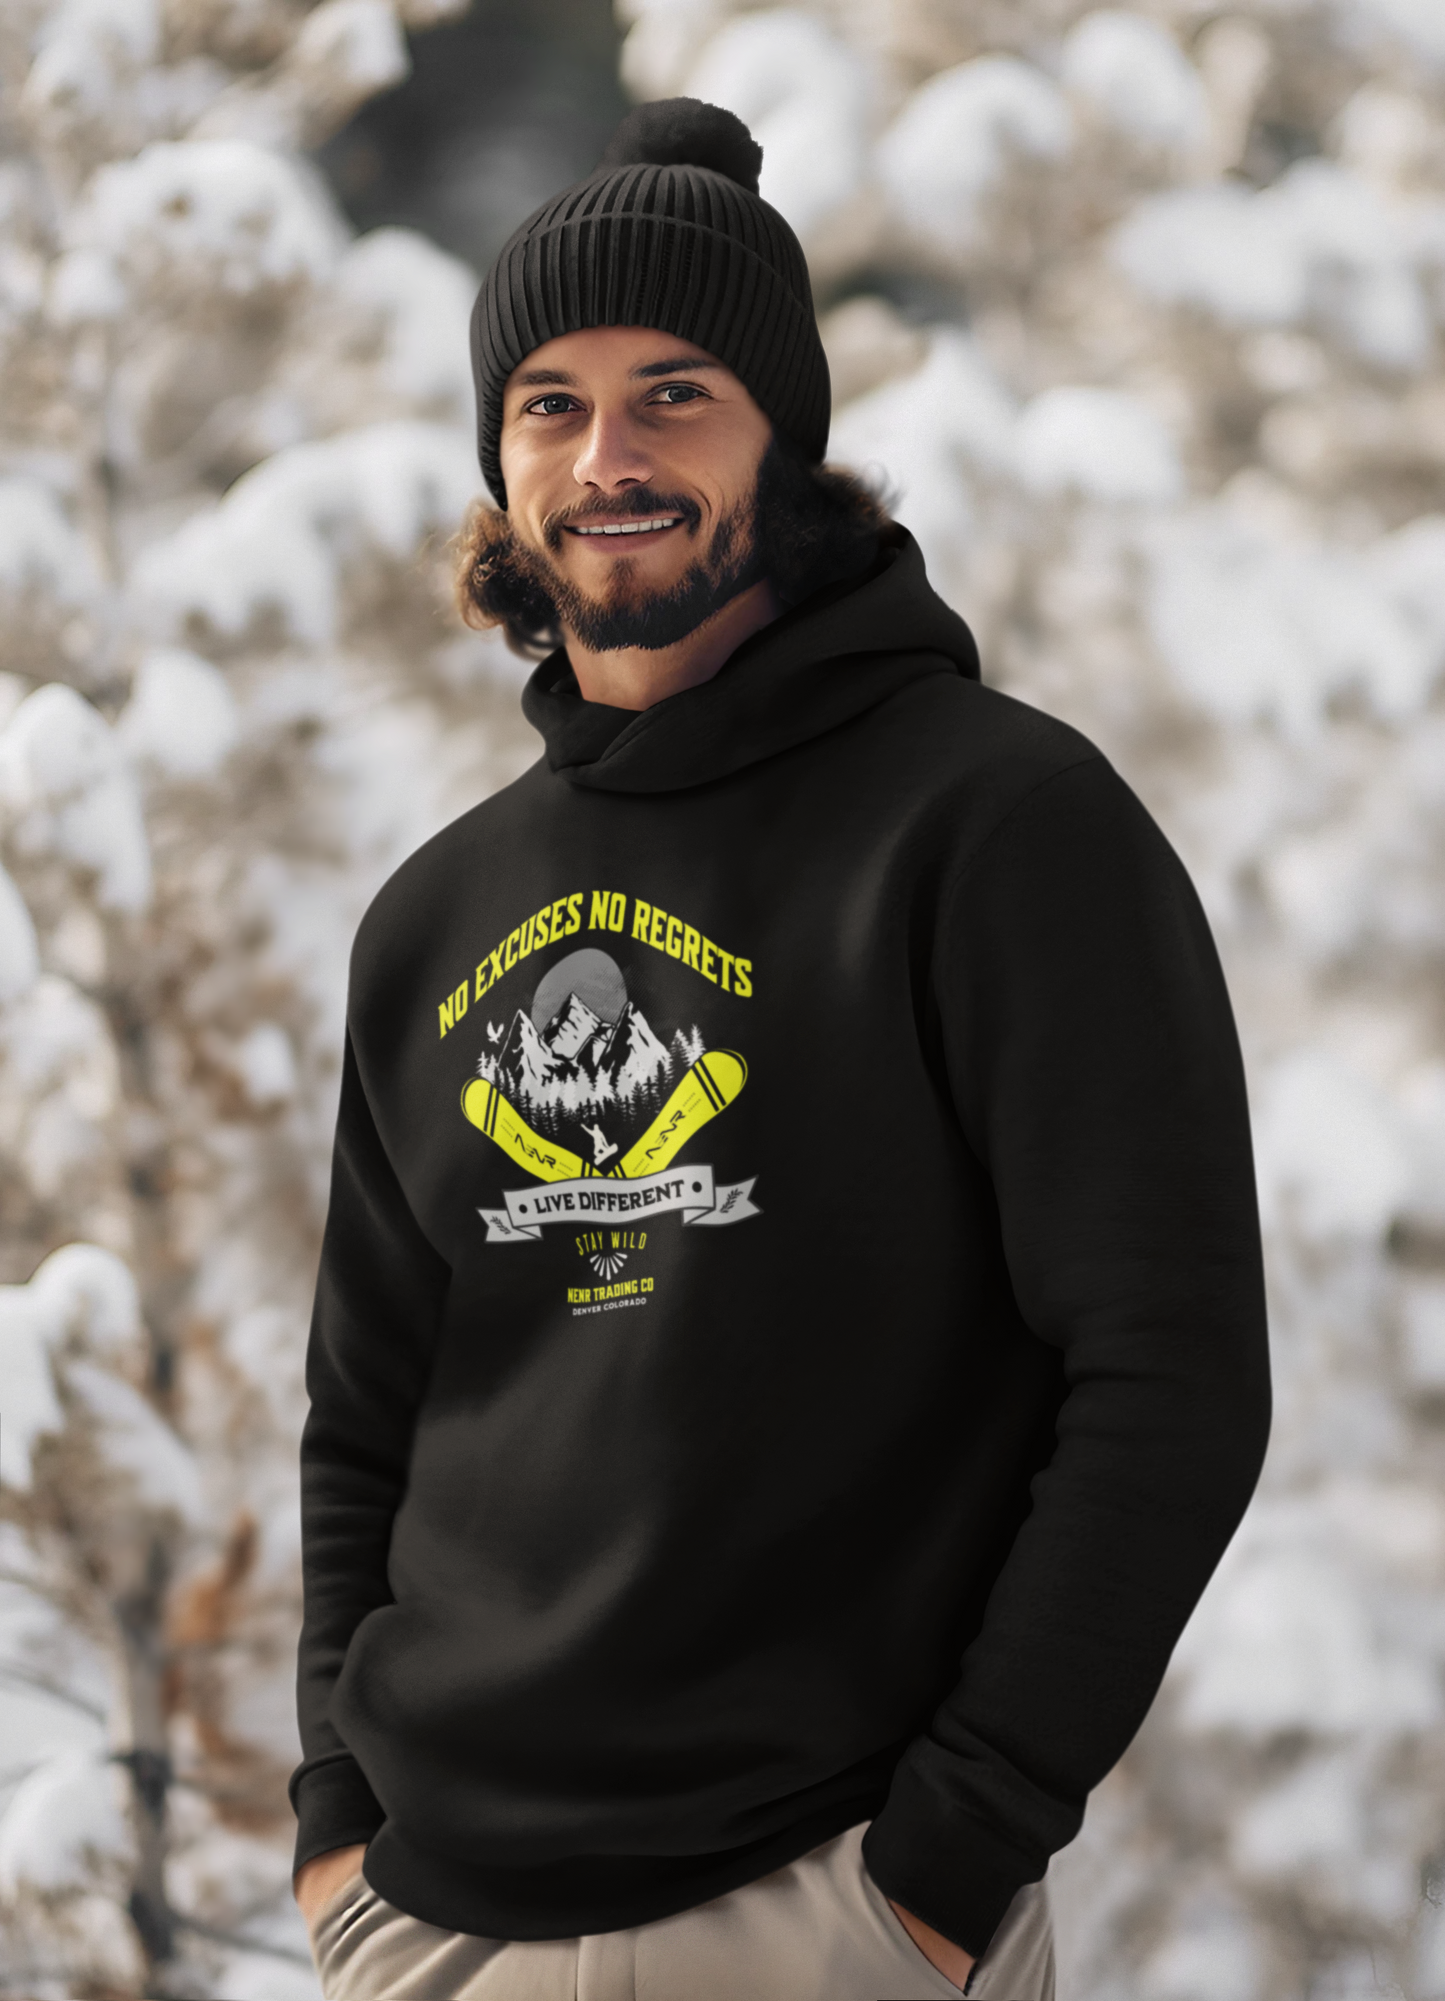 NO EXCUSES NO REGRETS ~ NENR ~ HIGHER ELEVATION HOODIE